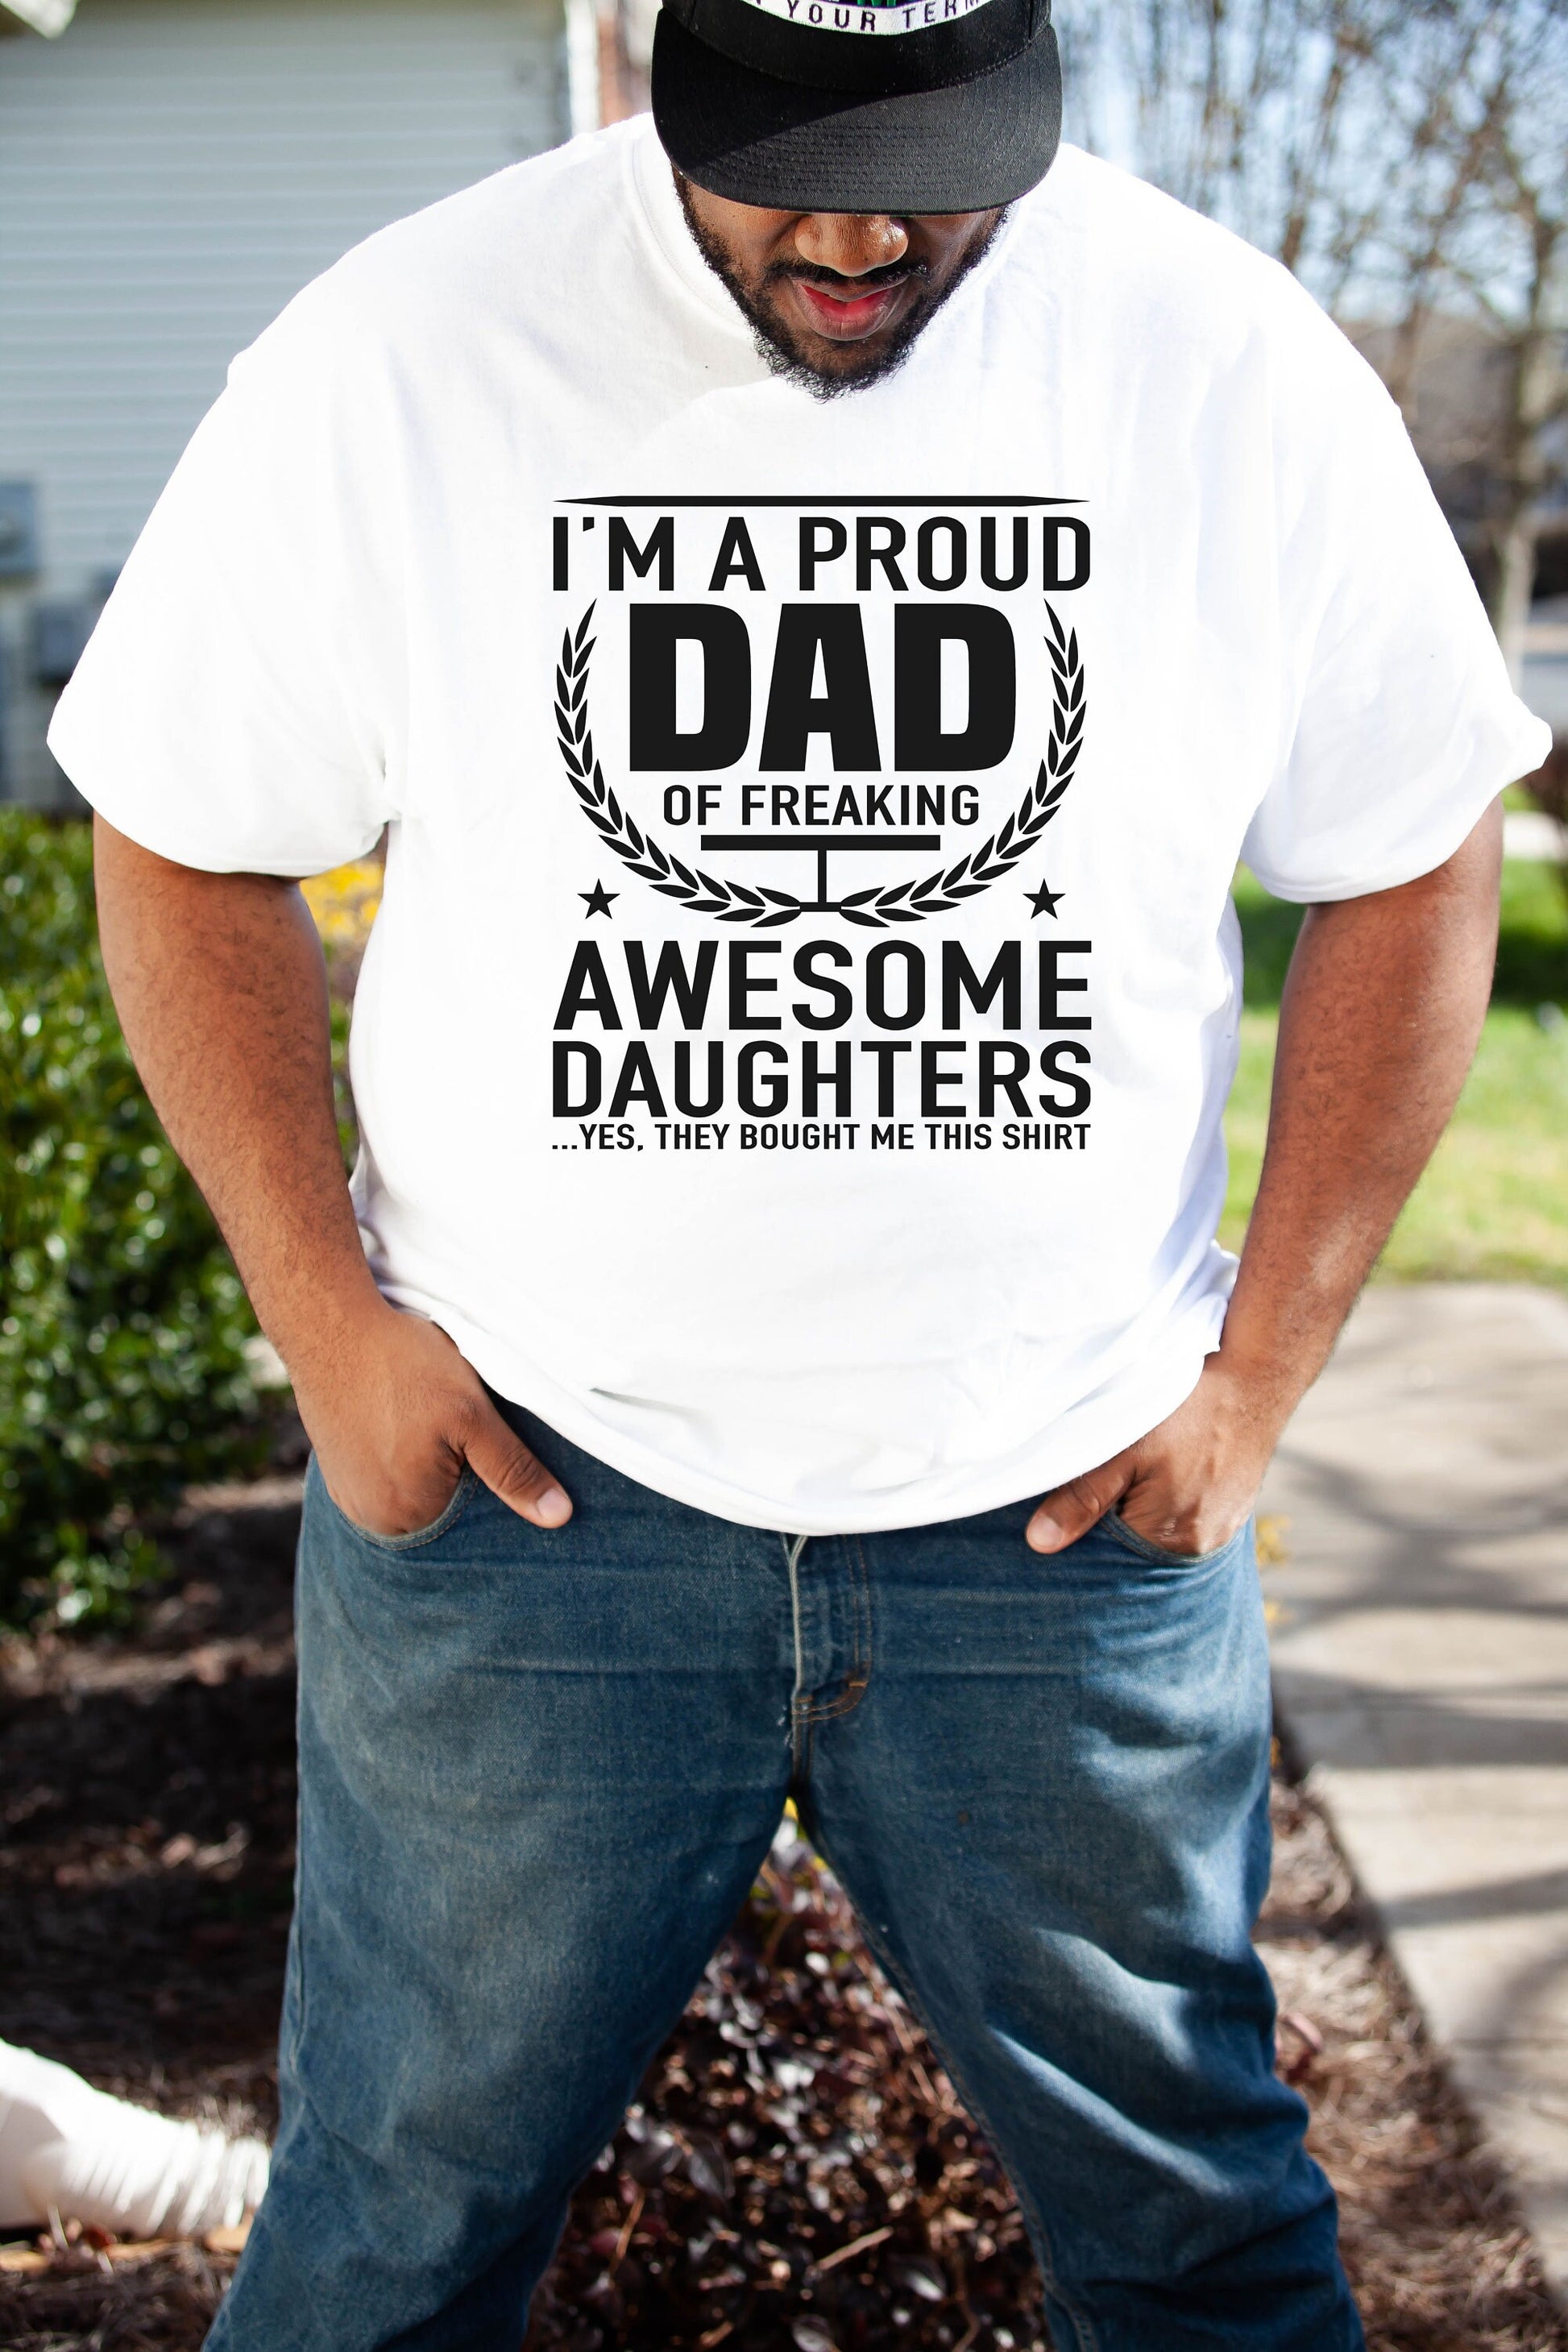 Proud Dad of Freaking Awesome Daughters T-Shirt - Father's Day Shirt - Dad of Girls Shirts - Gift from Daughters